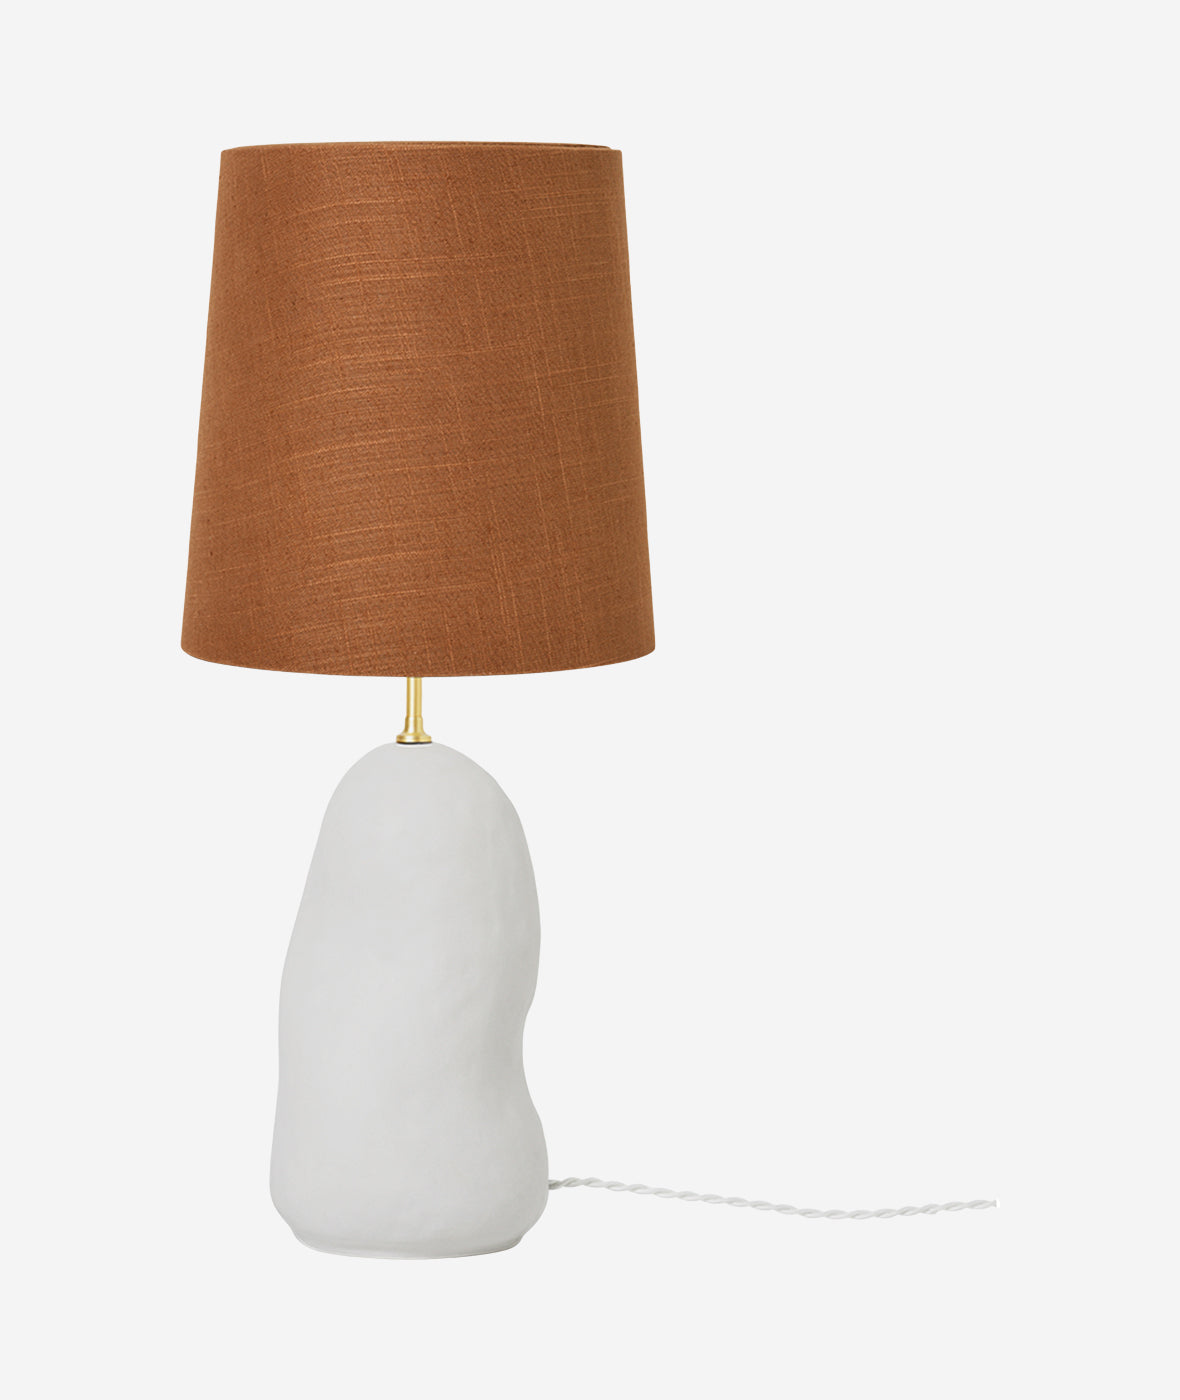 Hebe Table Lamp Medium - More Options